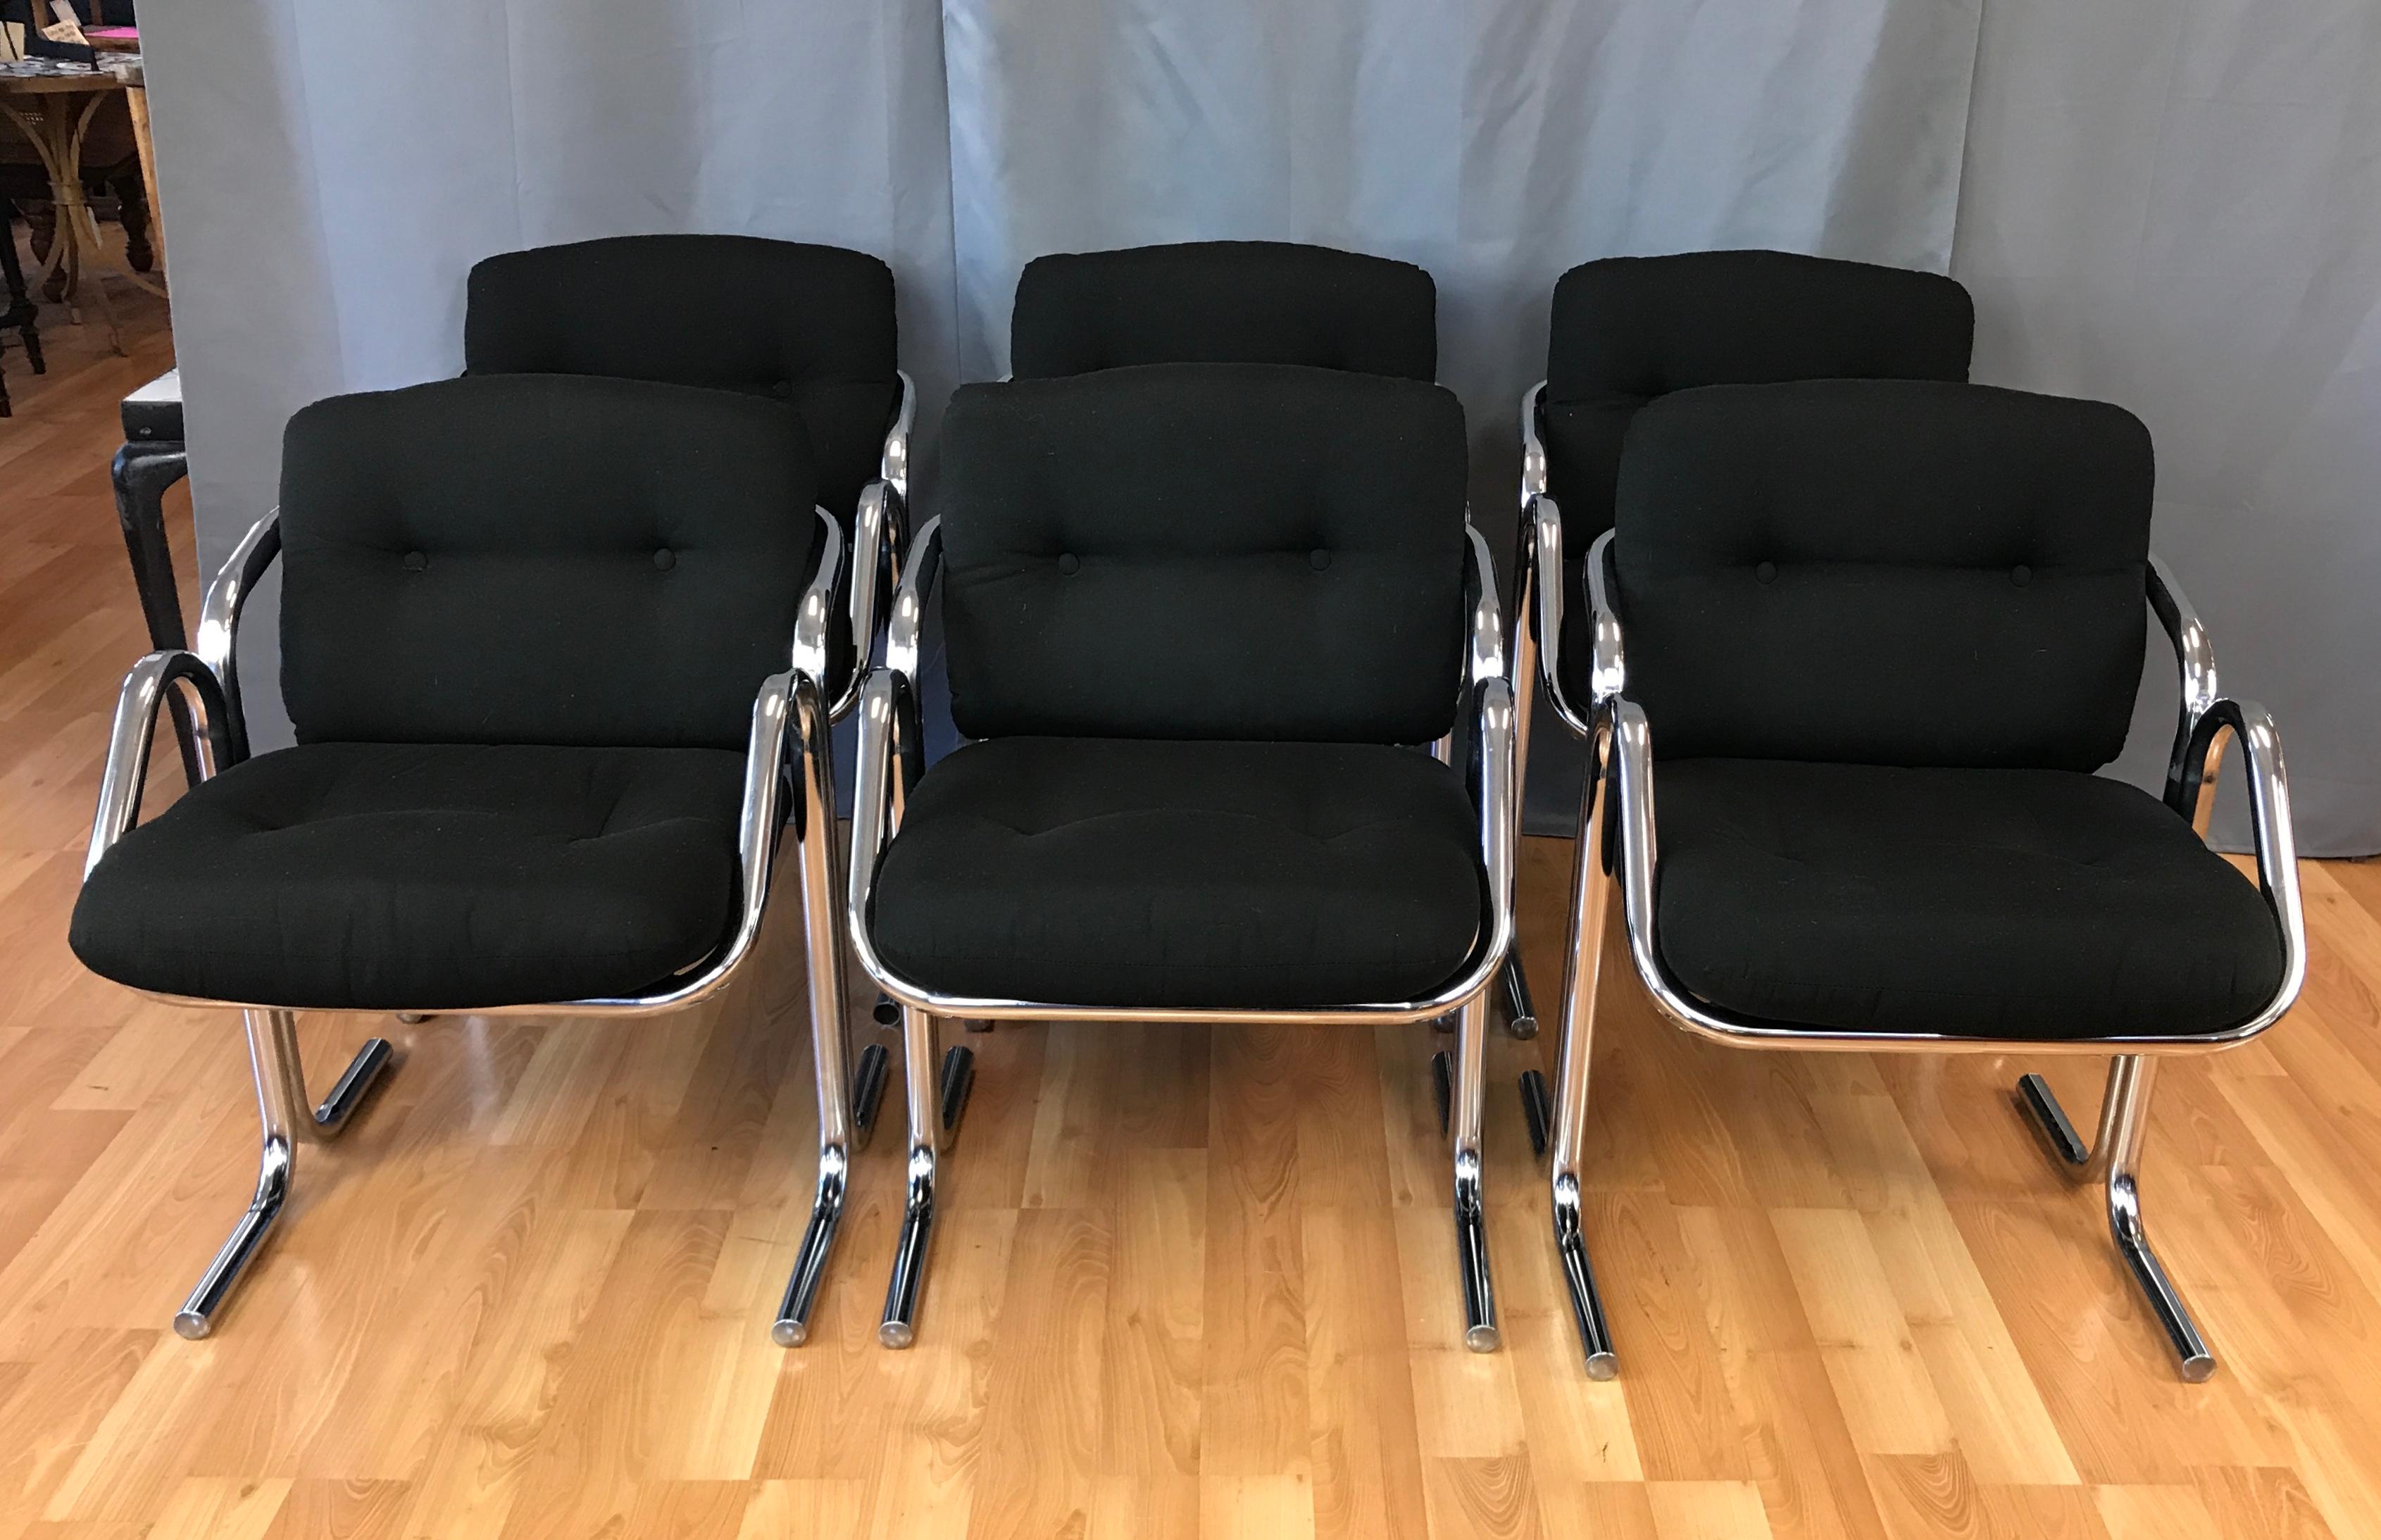 A striking and scarce set of six tubular chrome frame Arcadia dining chairs by Jerry Johnson for Landes Manufacturing.

Fantastic retro-futuristic lines defined by a pair of opposing chromed steel tubes that rise from the floor to curve around,